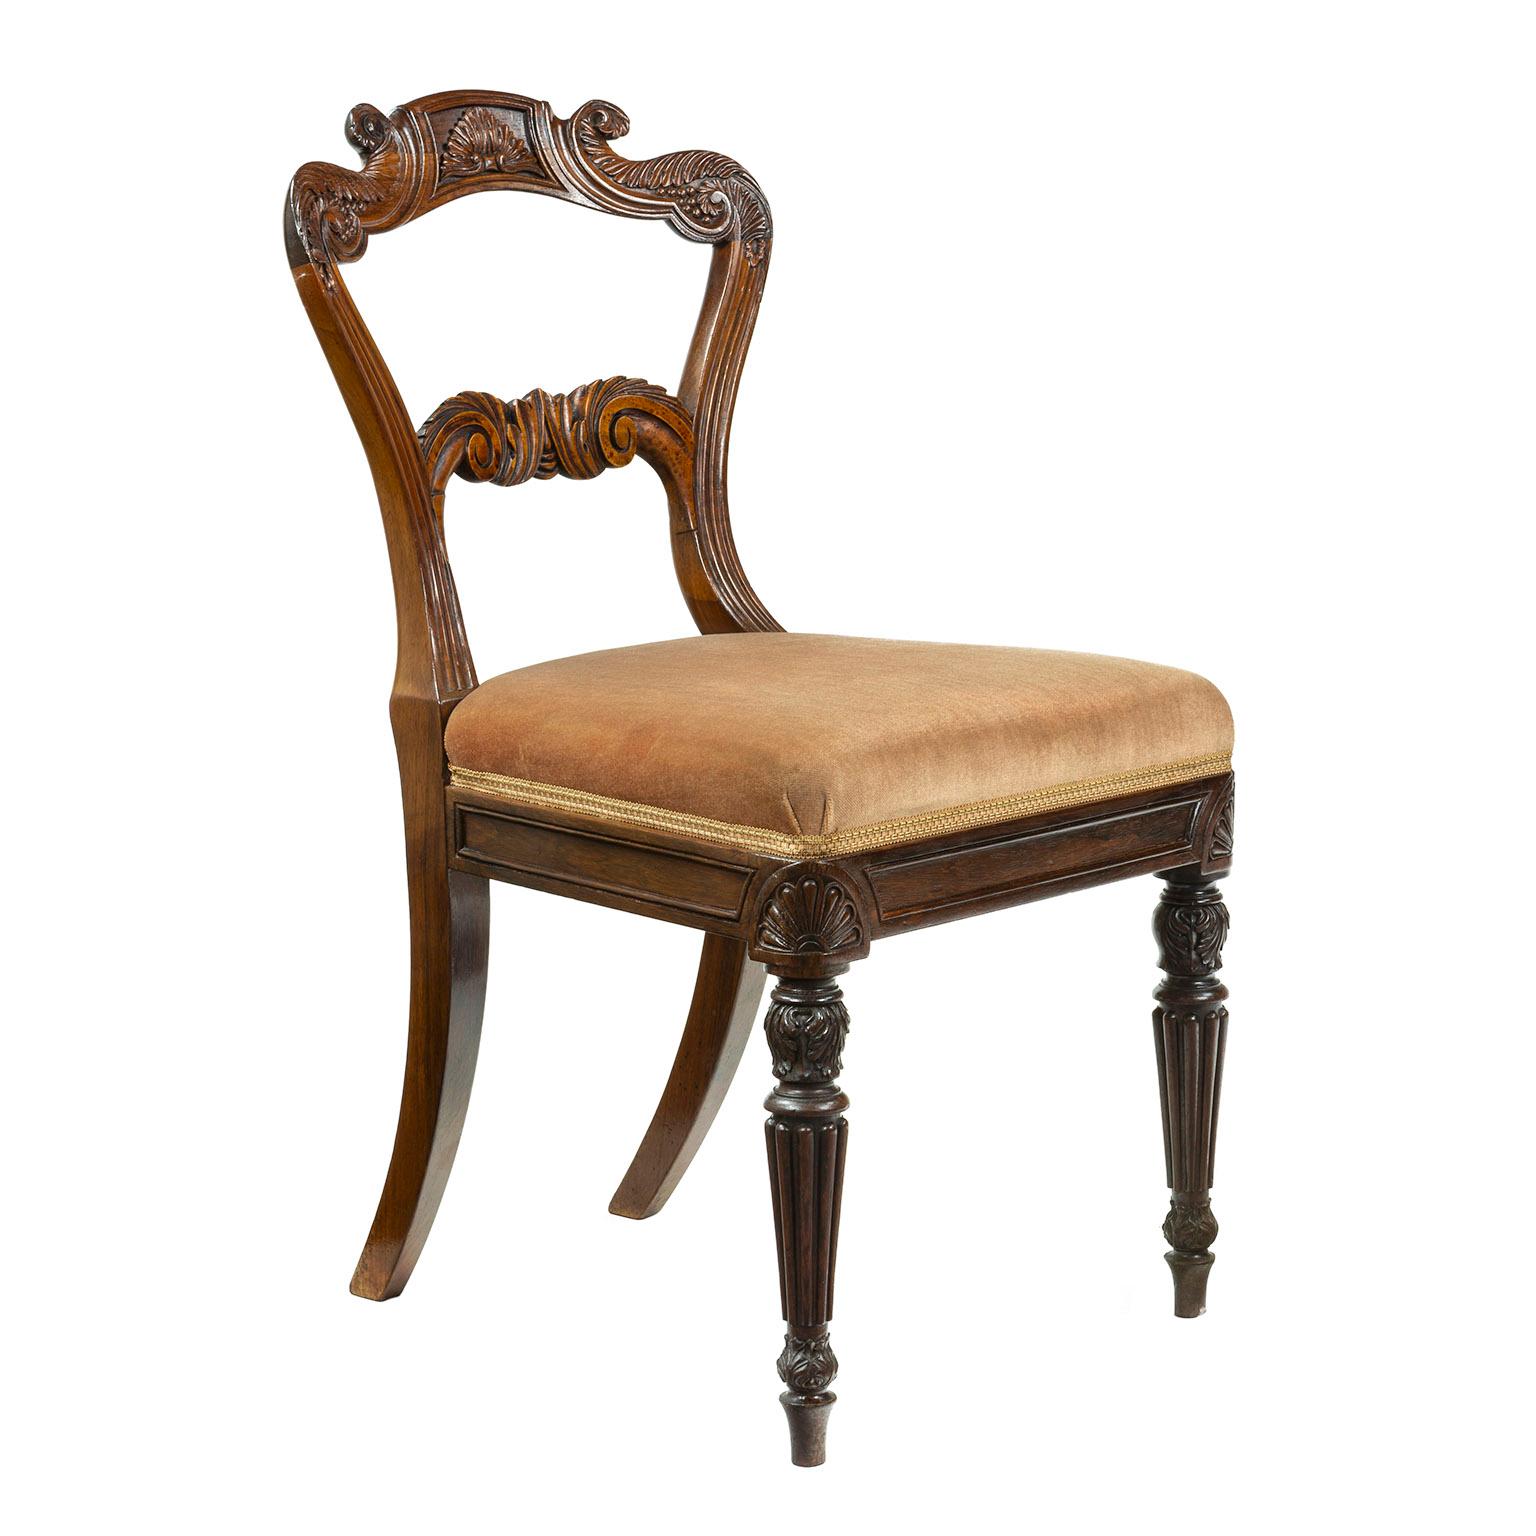 Early 19th Century Gillows a Set of Six Regency Mahogany Dining Chairs For Sale